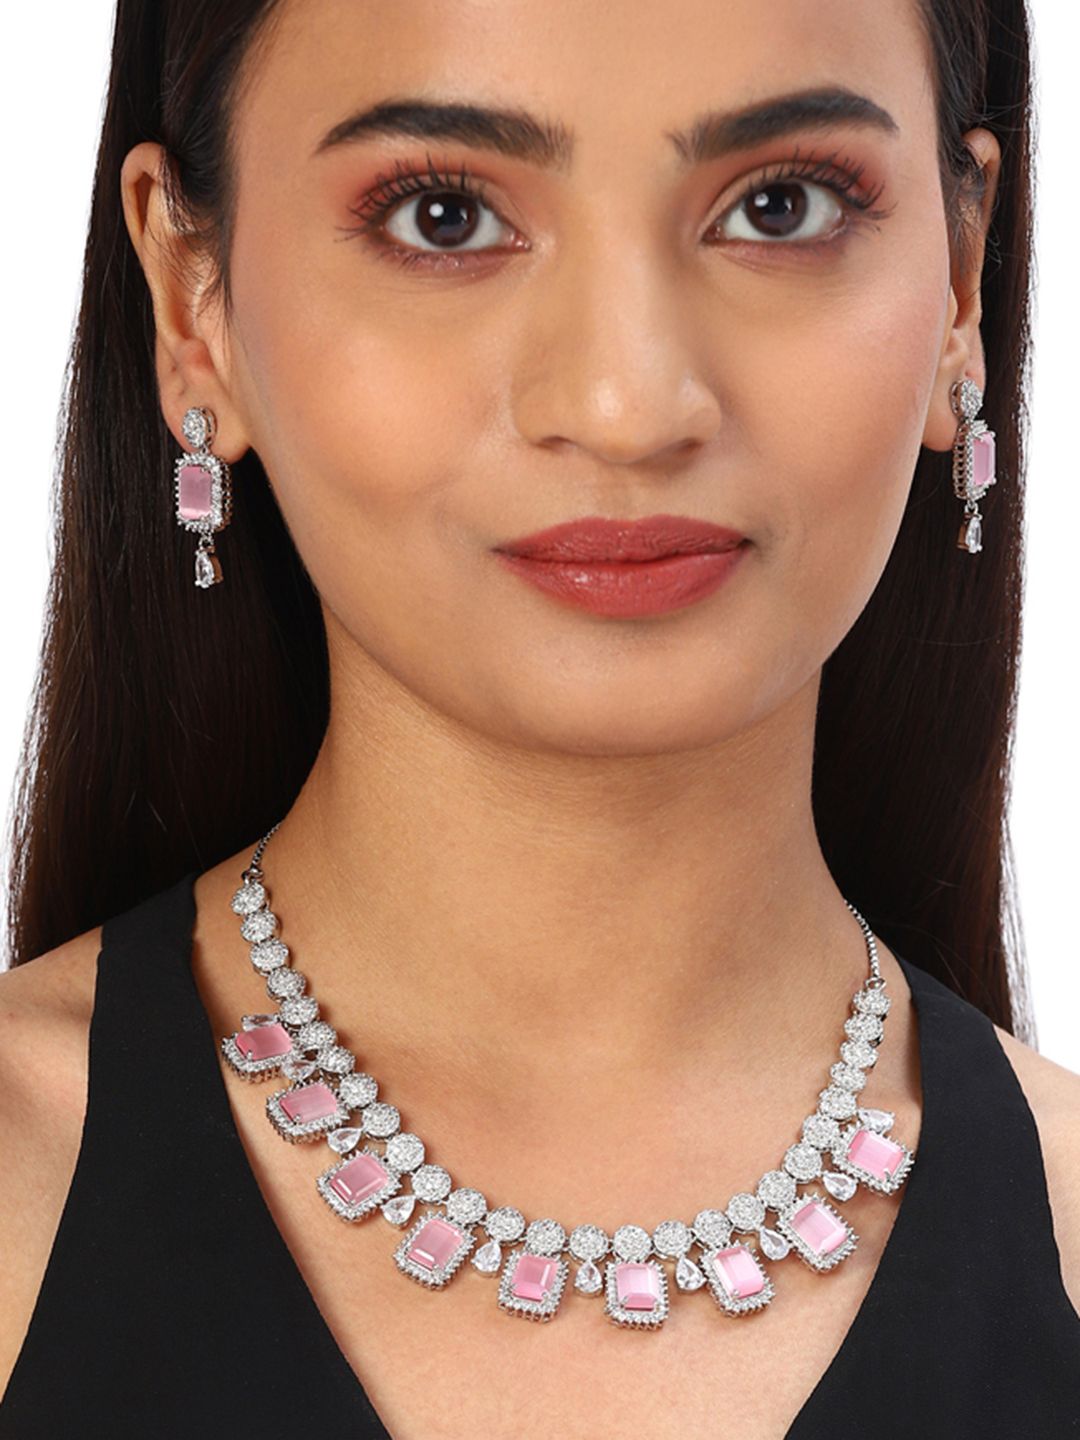 Voylla Rose Gold Plated American Diamond CZ Necklace Set with Pink Stone (Onesize) by Myntra